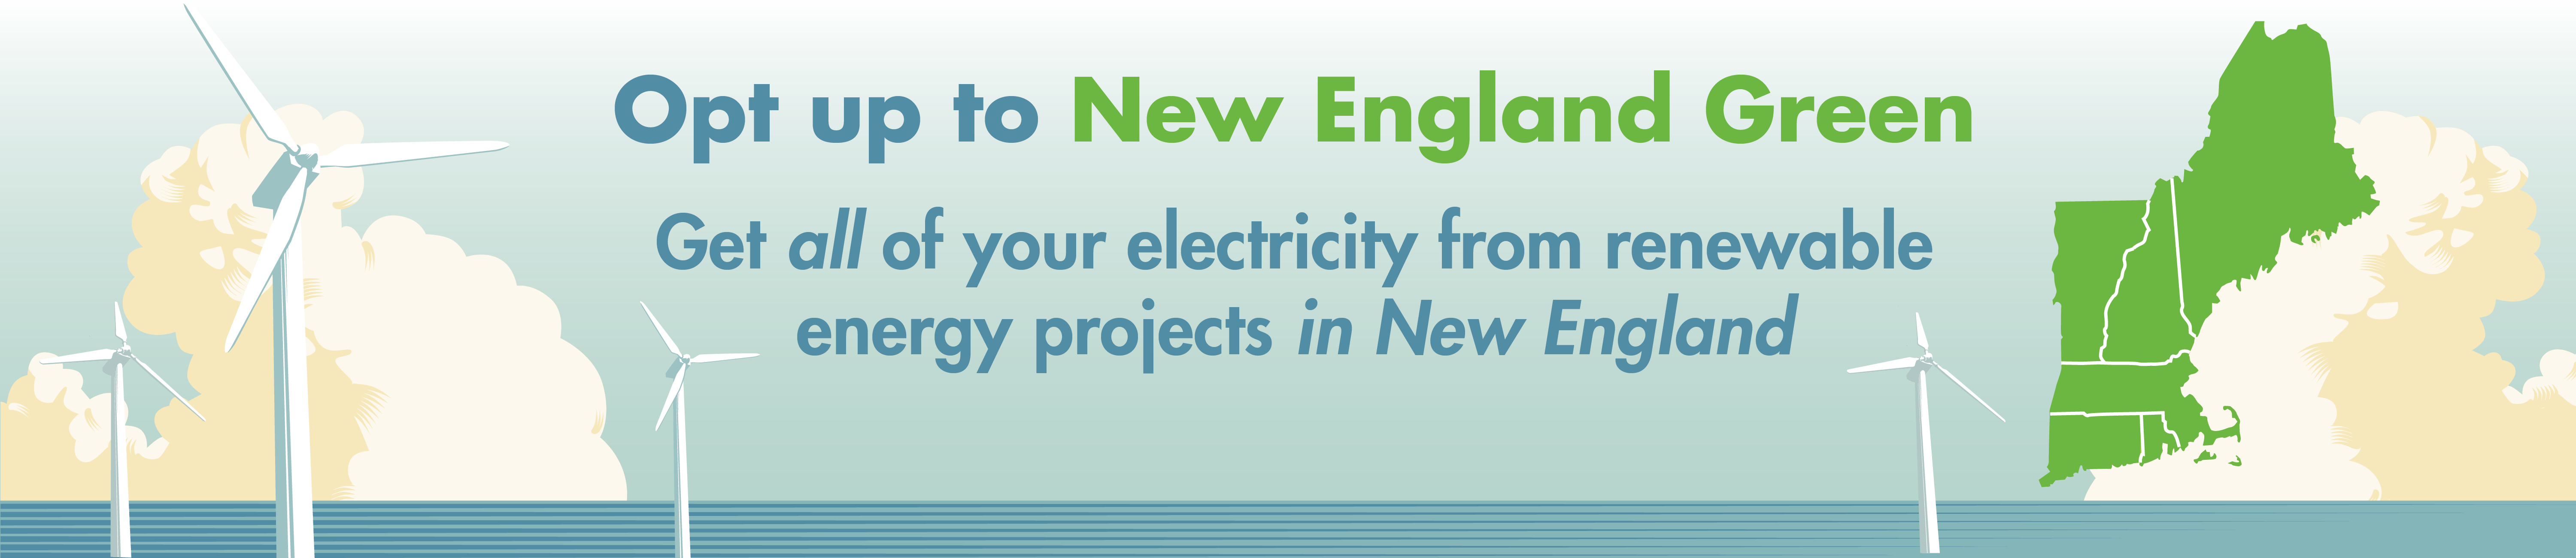 Opt up to New England Green. Get all of your electricity from renewable energy projects in New England.